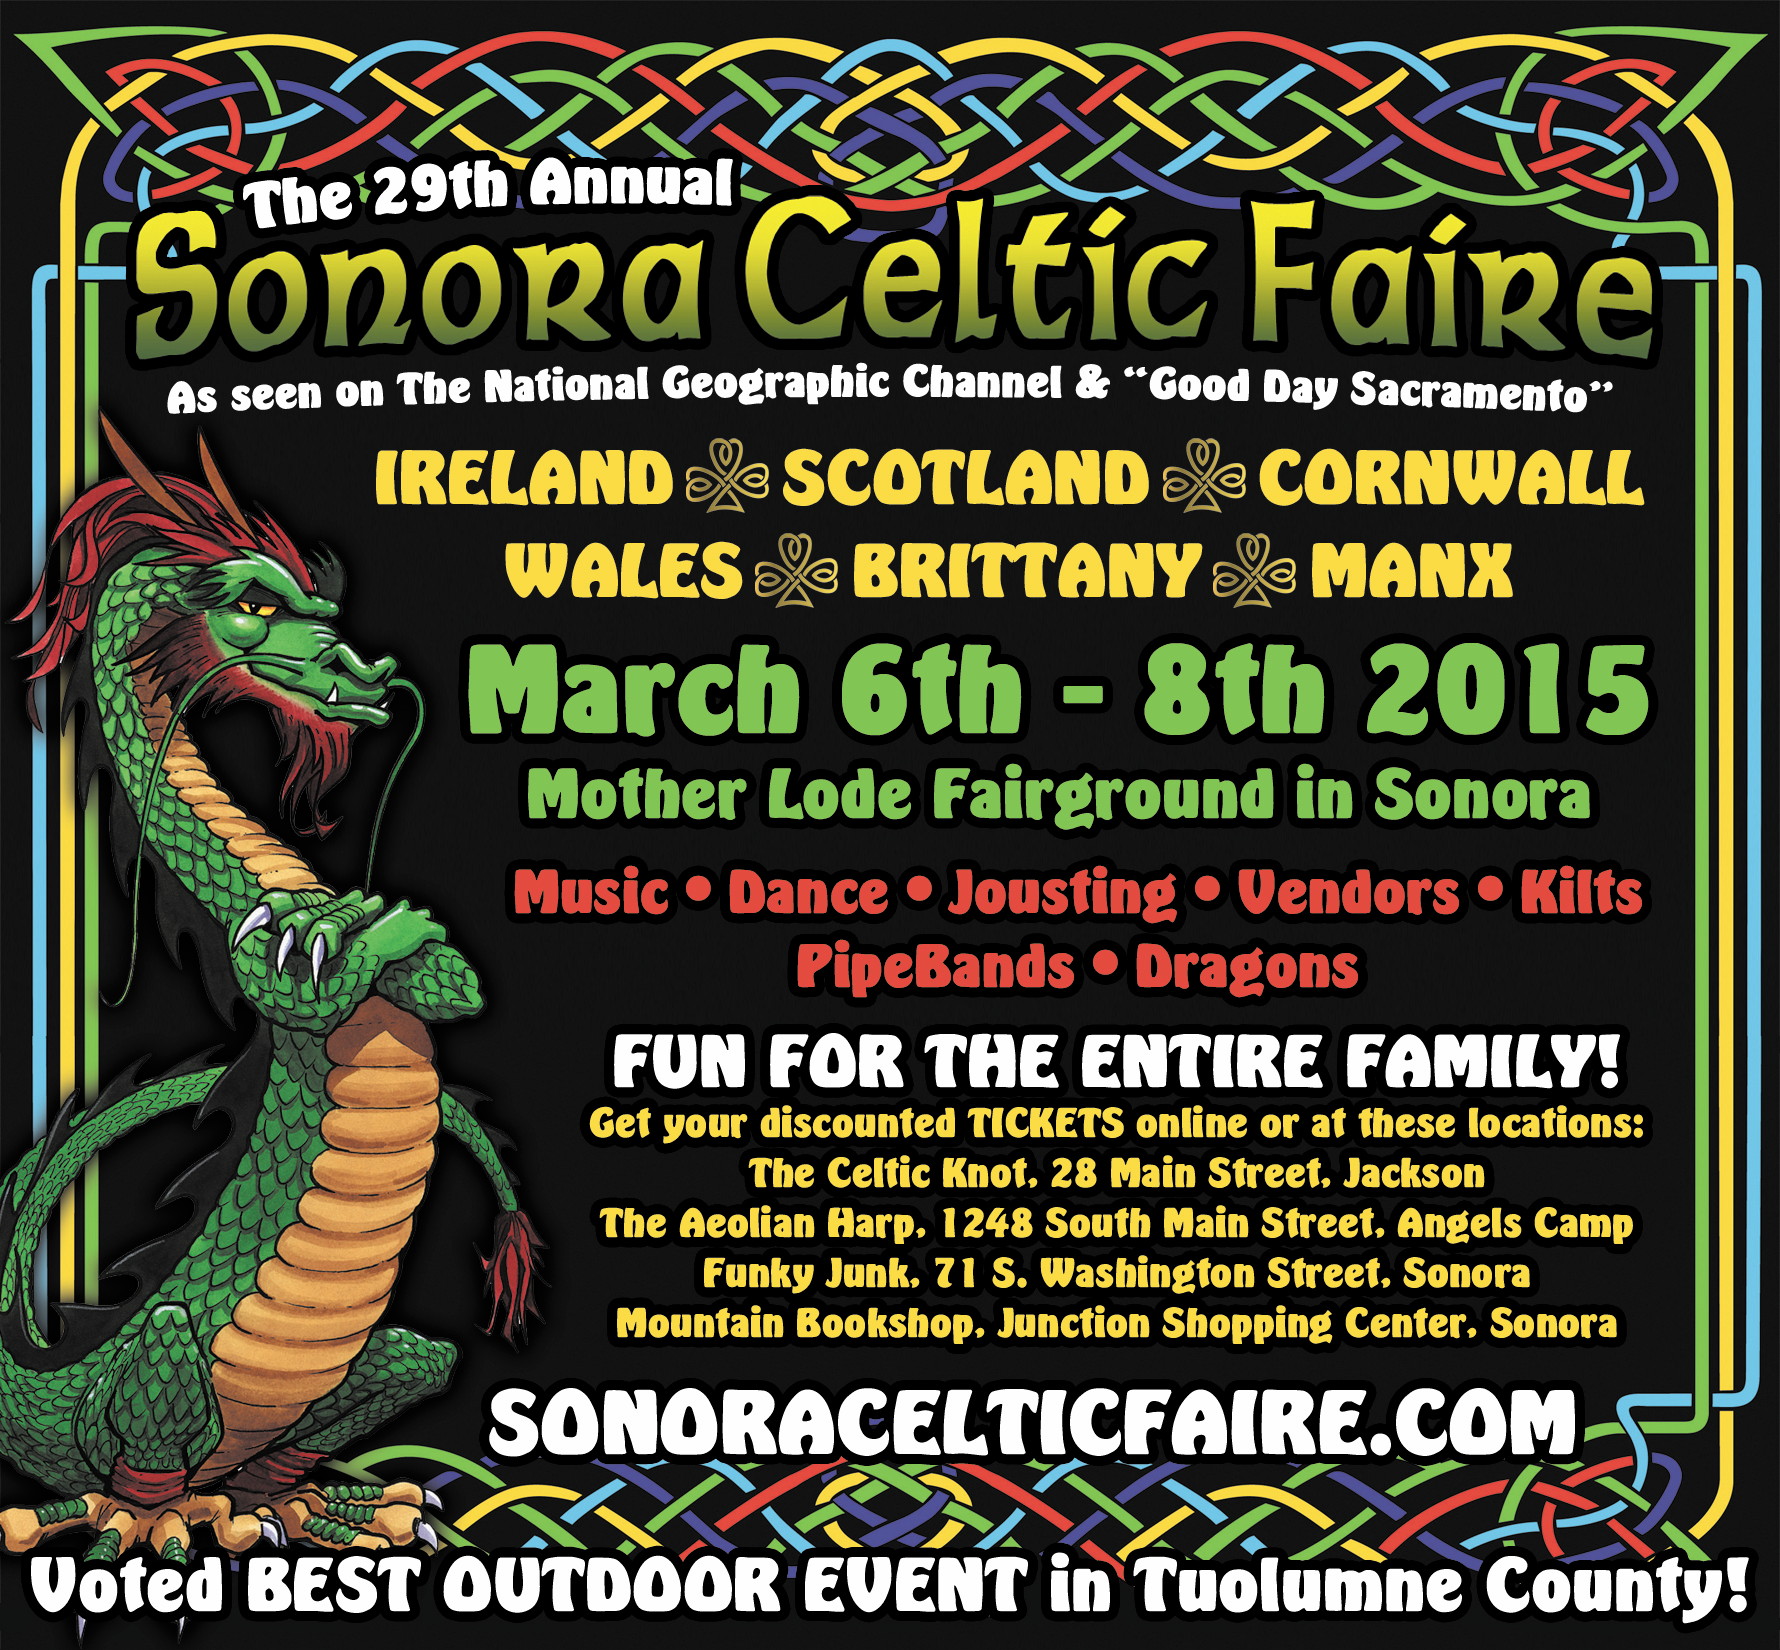 The 29th Annual Sonora Celtic Faire is this weekend! Modestoview